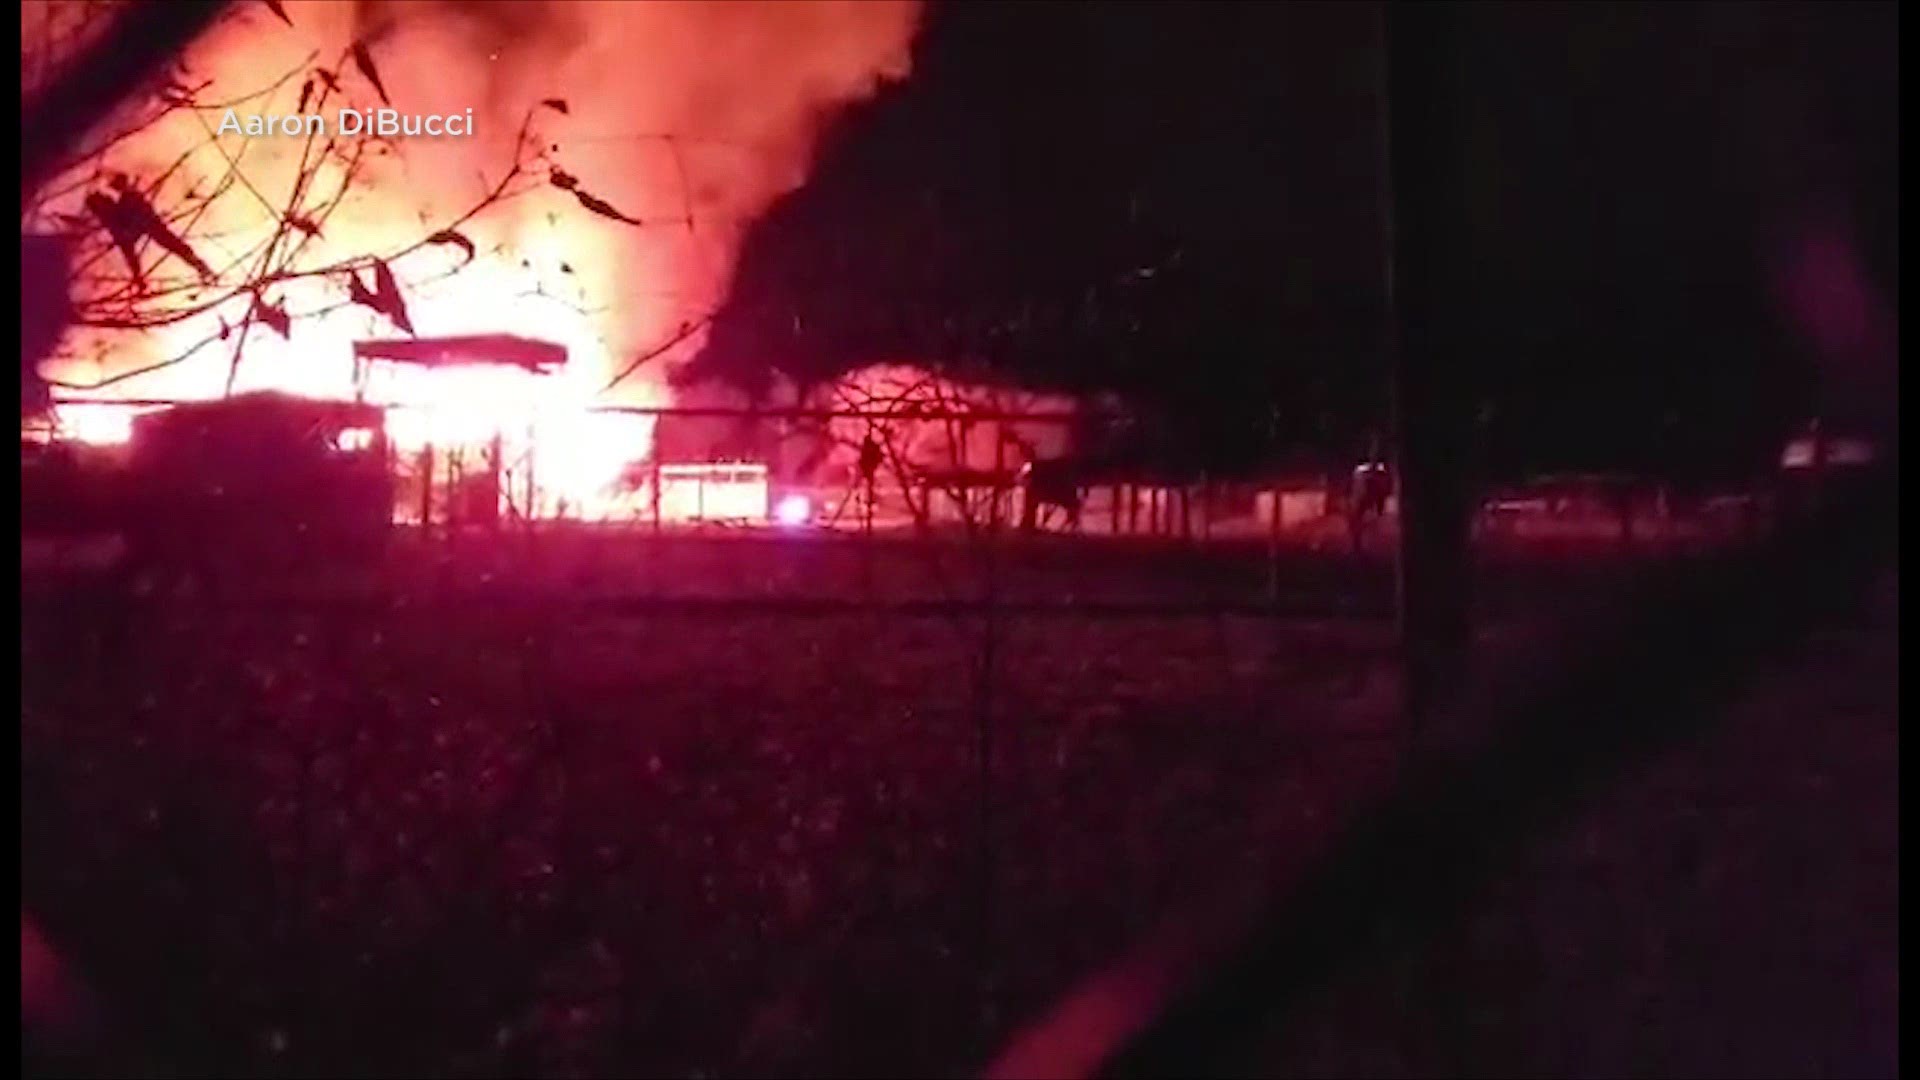 The African Safari Wildlife Park team in Ottawa County, OH is devastated after 10 animals were killed due to a barn fire that erupted Thursday evening.